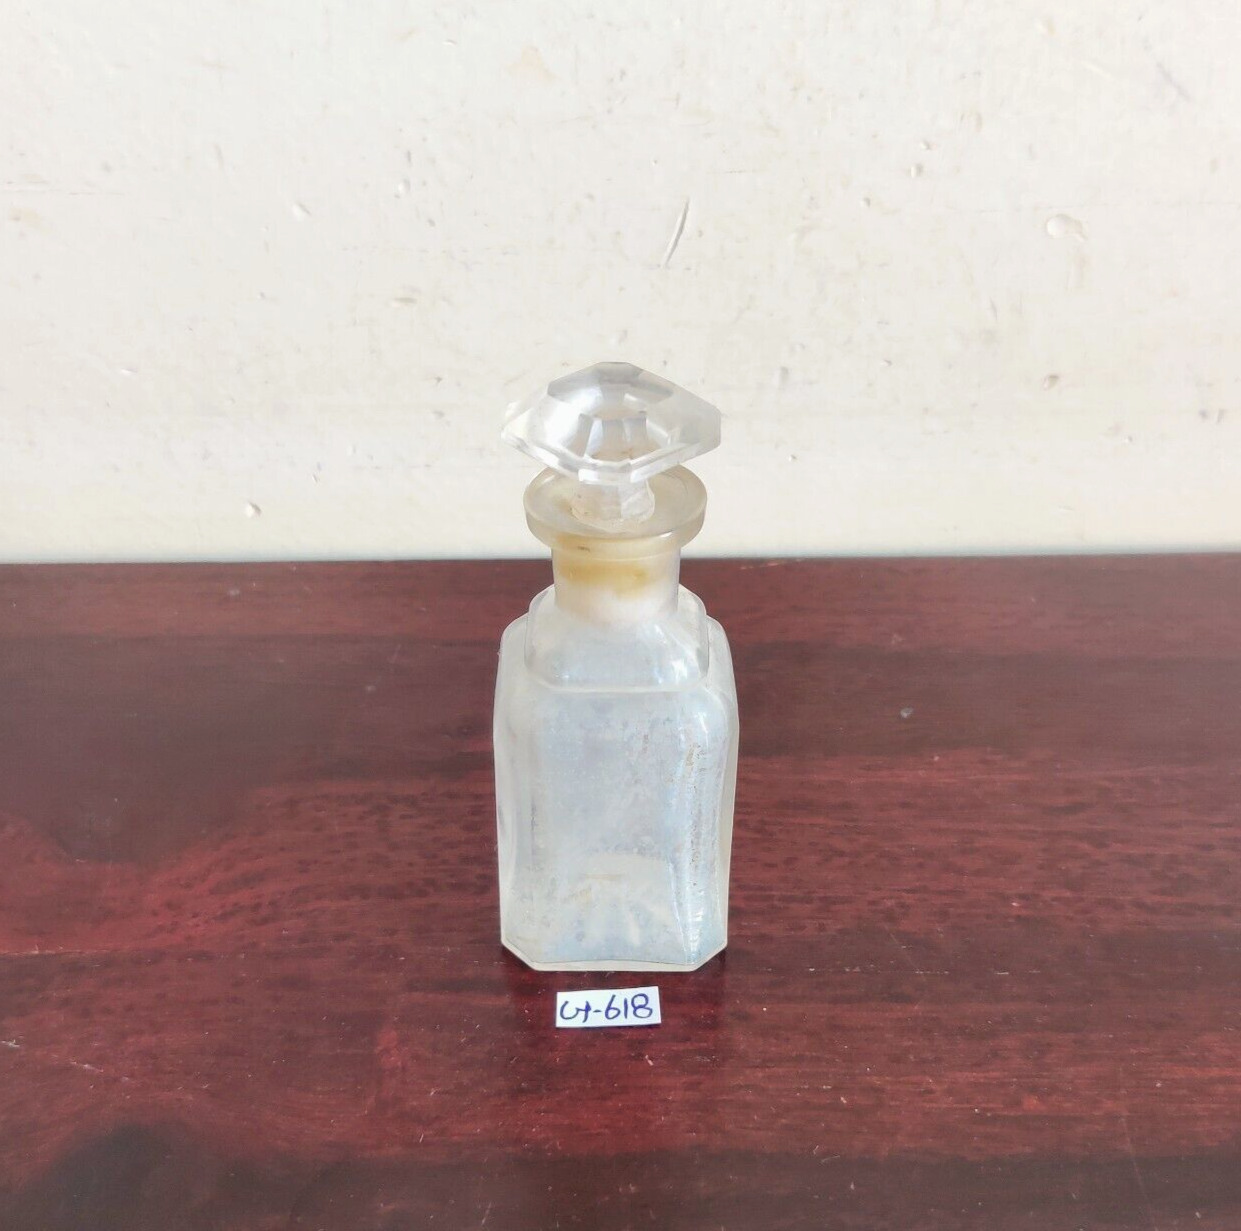 1920s Vintage Old Clear Perfume Glass Bottle Decorative Collectible Props G618